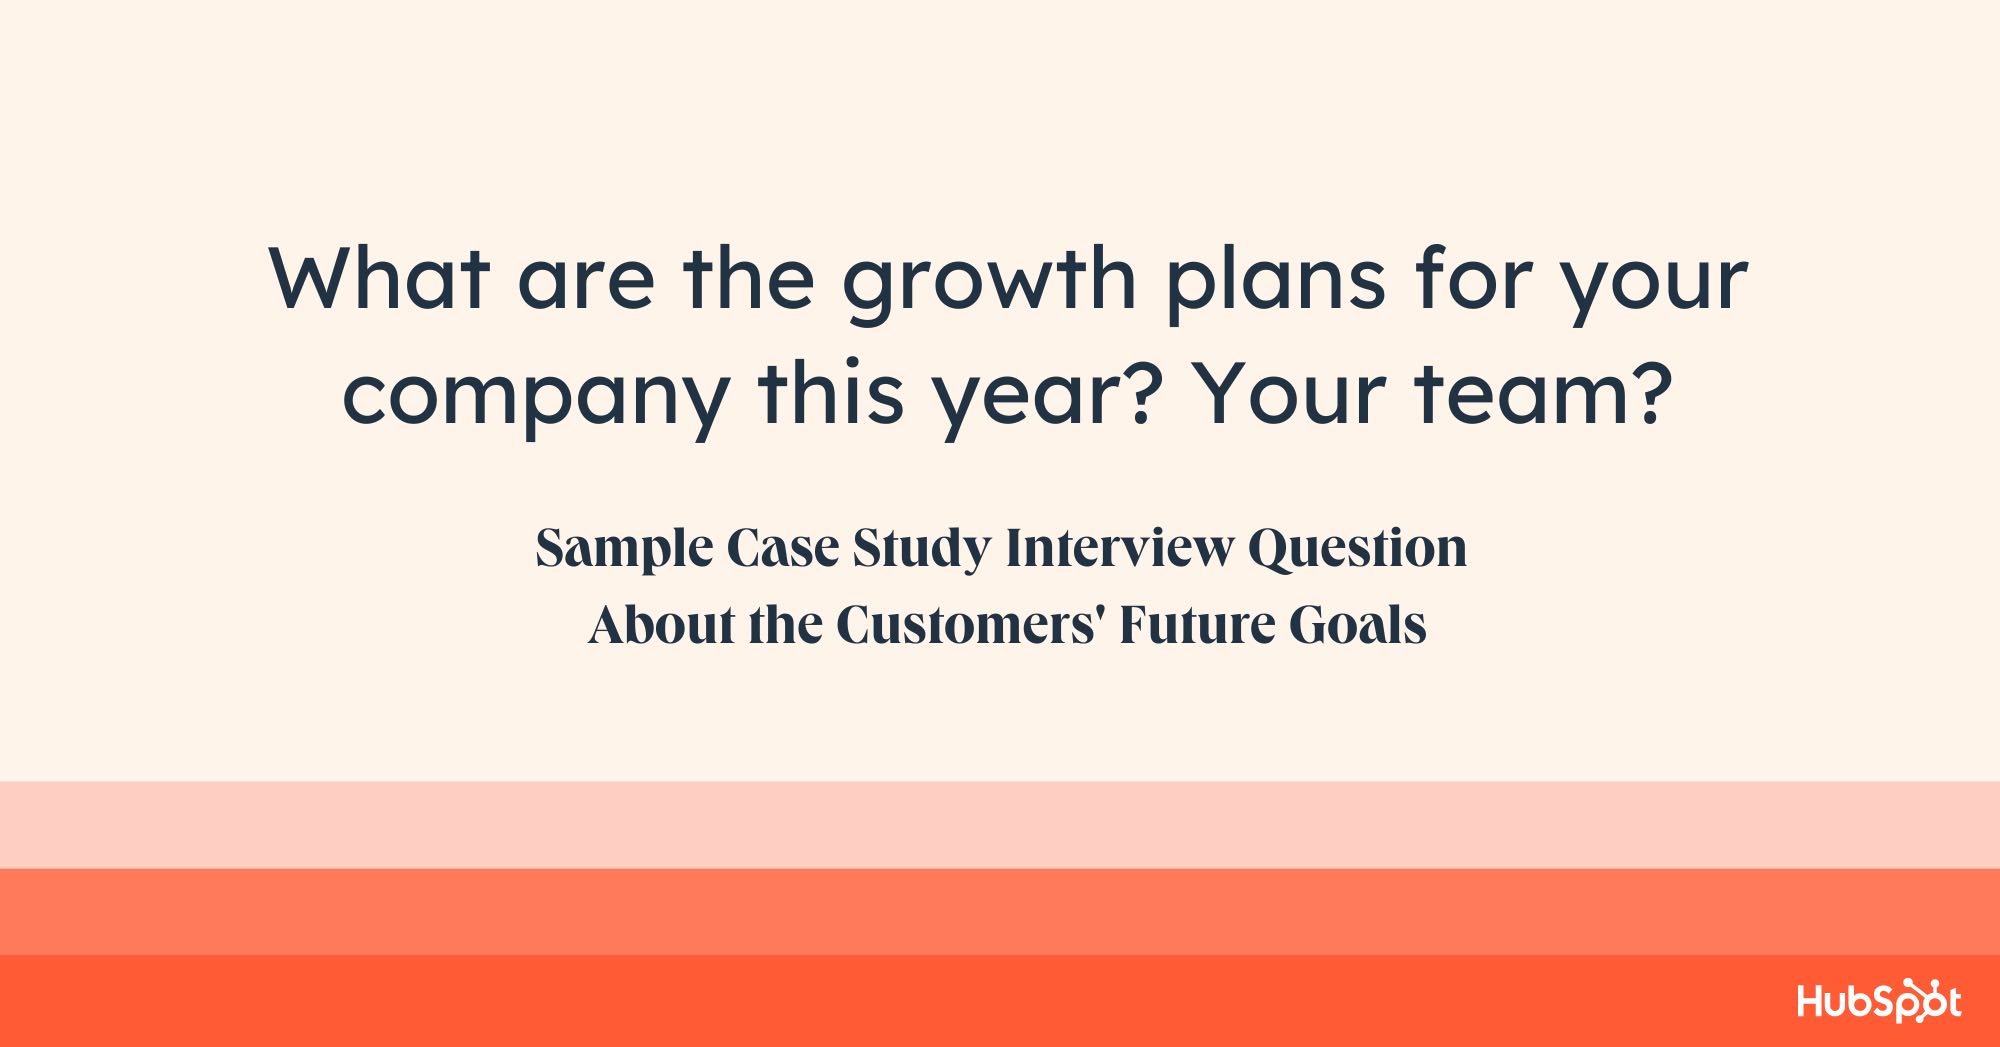 Case study questions examples, what are the growth plans for your company this year? Your team?